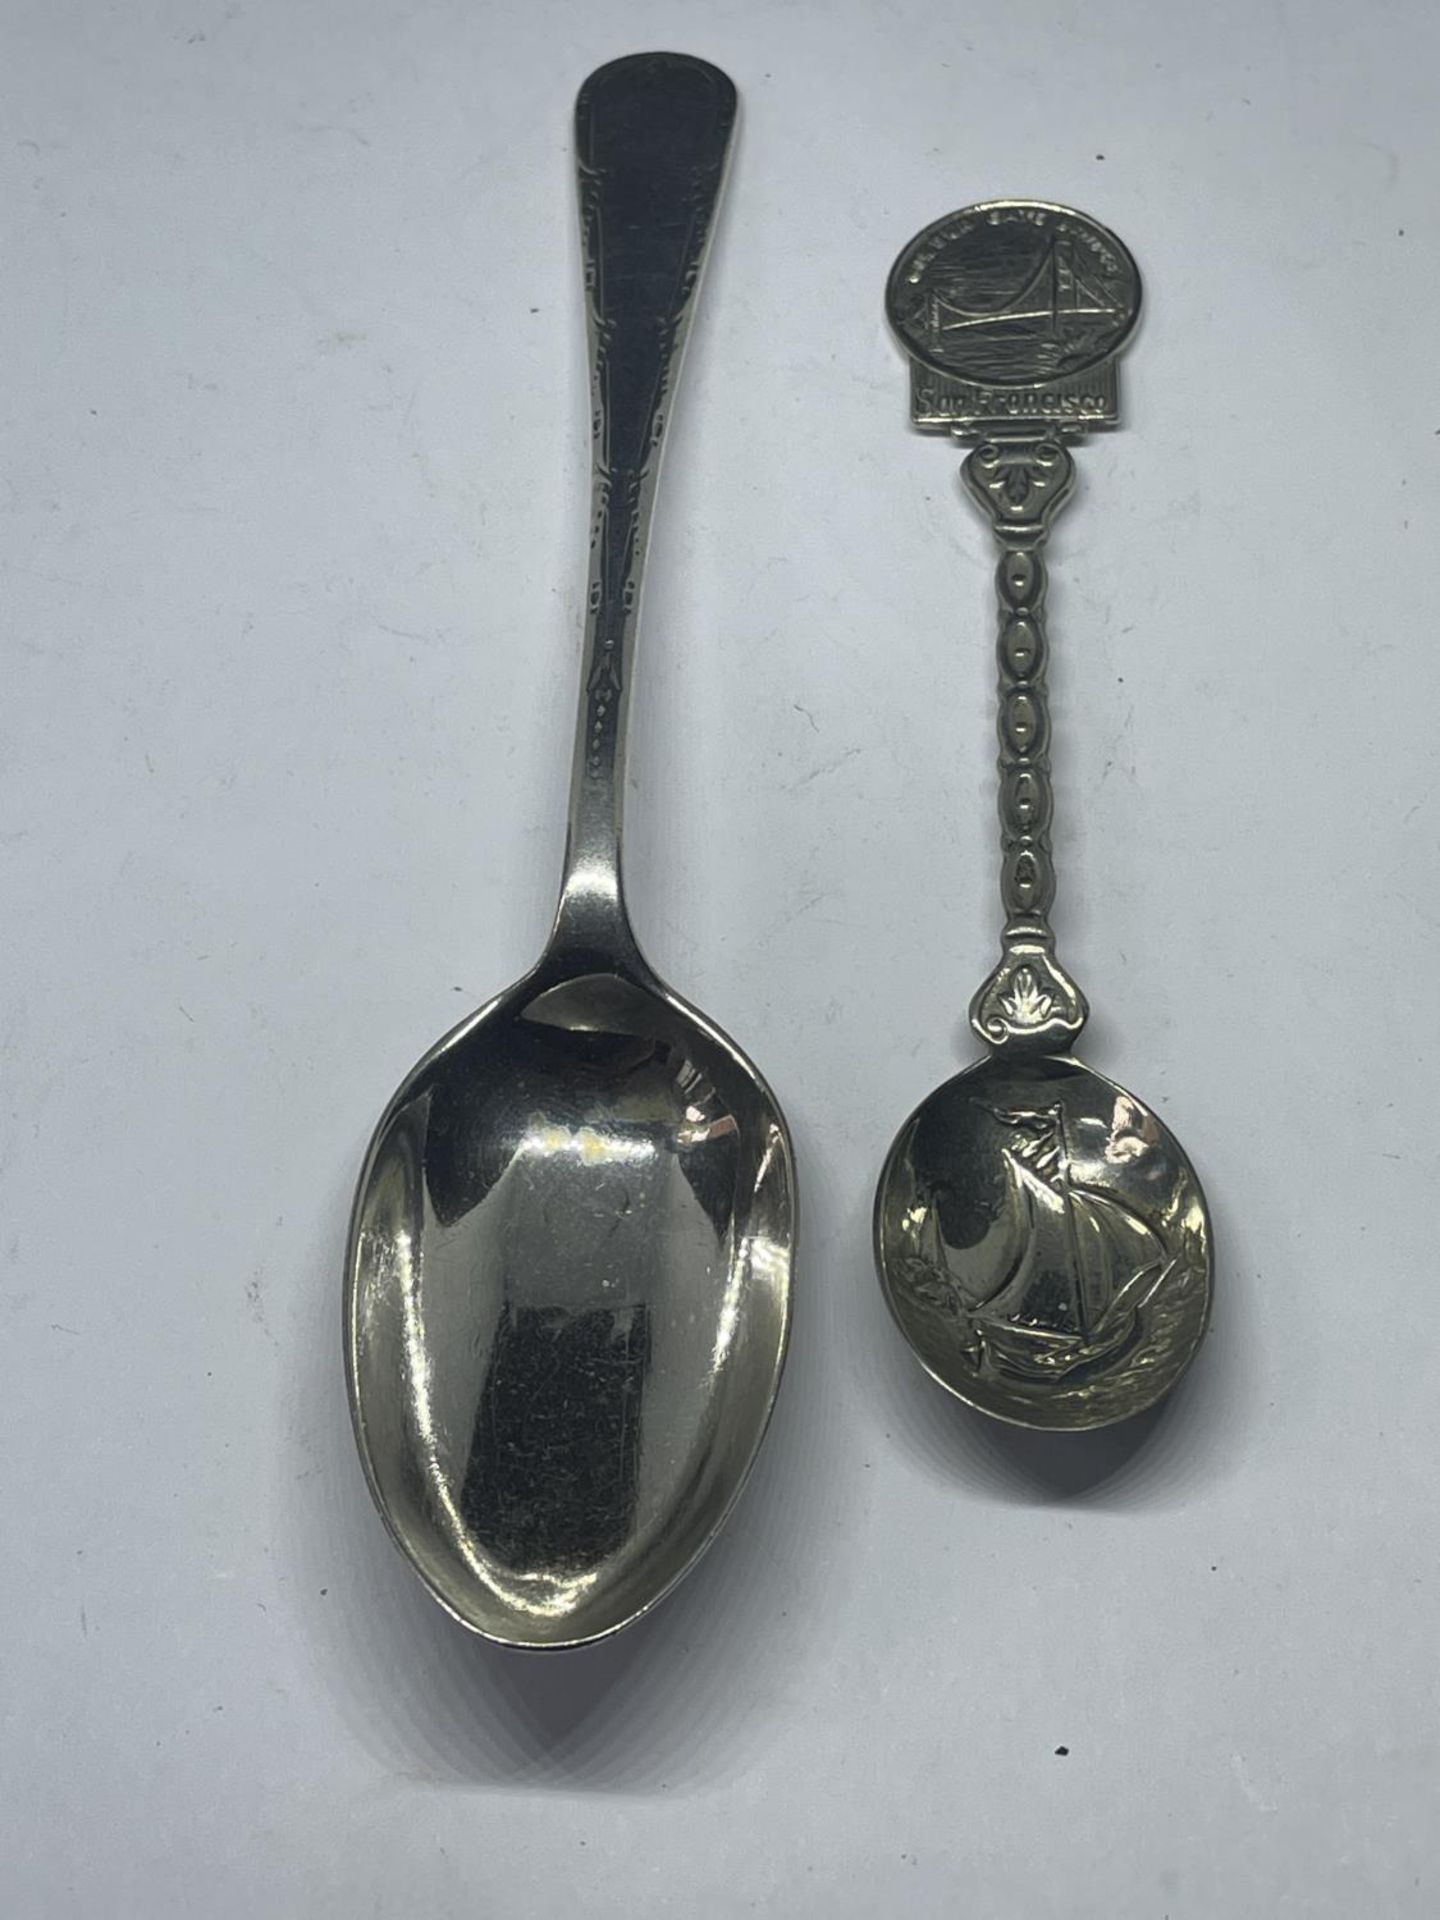 TWO SPOONS ONE HALLMARKED SHEFFIELD THE OTHER A SAN FRANISCO COMMEMORATIVE